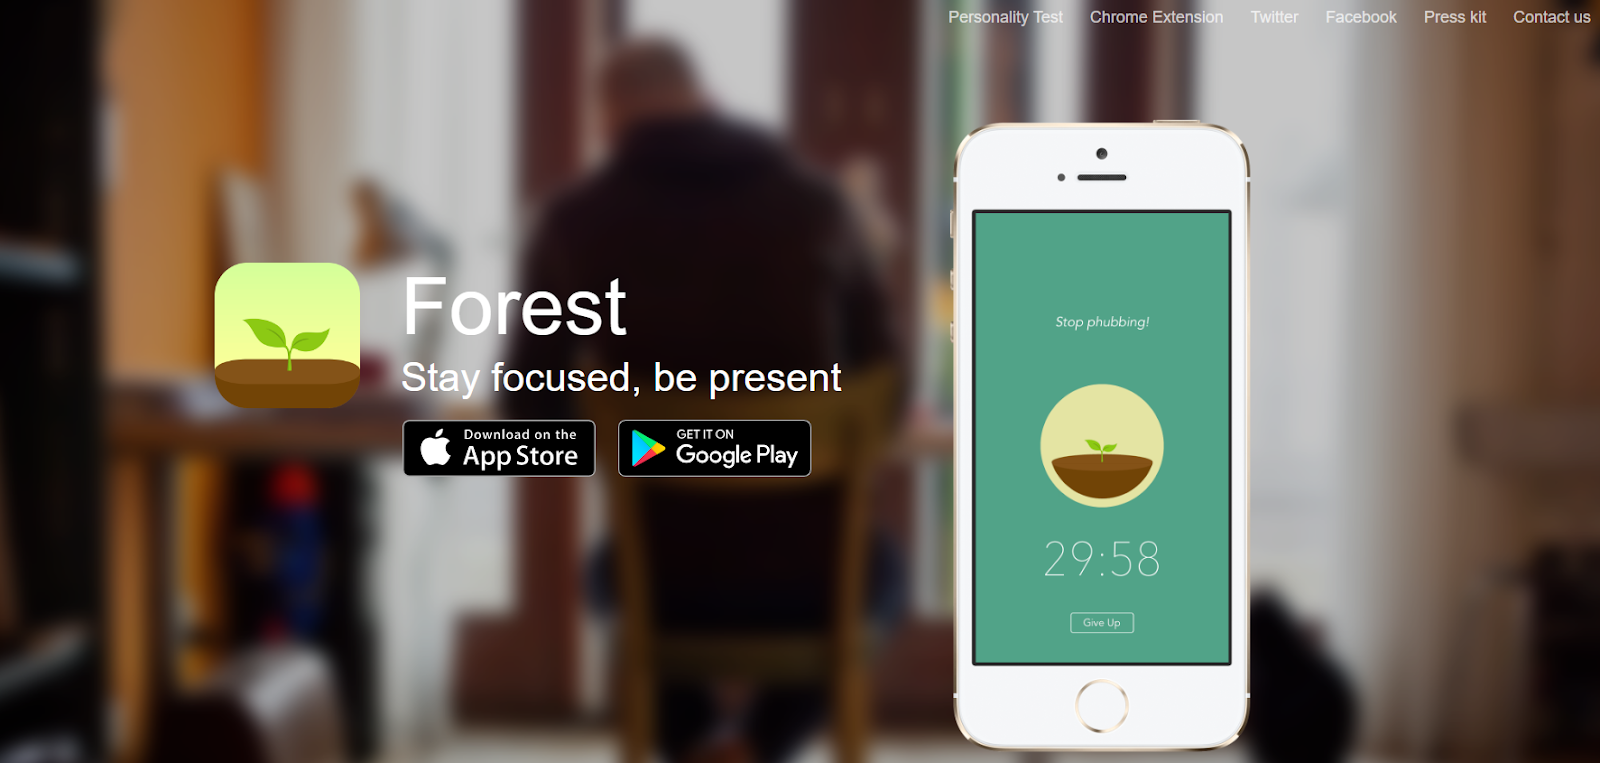 Forest homepage, with image of phone with app